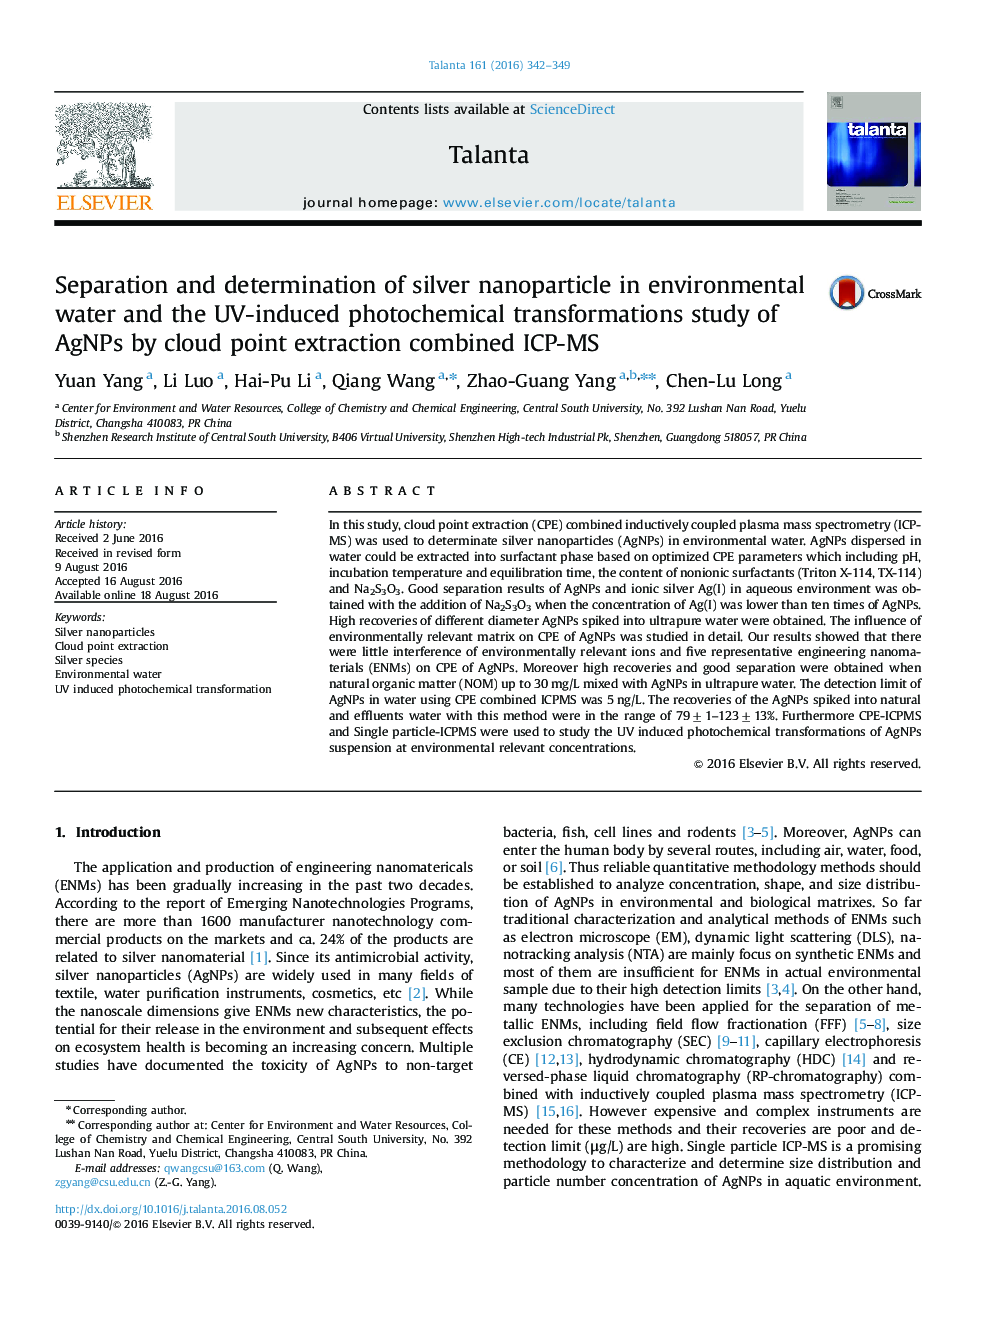 Separation and determination of silver nanoparticle in environmental water and the UV-induced photochemical transformations study of AgNPs by cloud point extraction combined ICP-MS